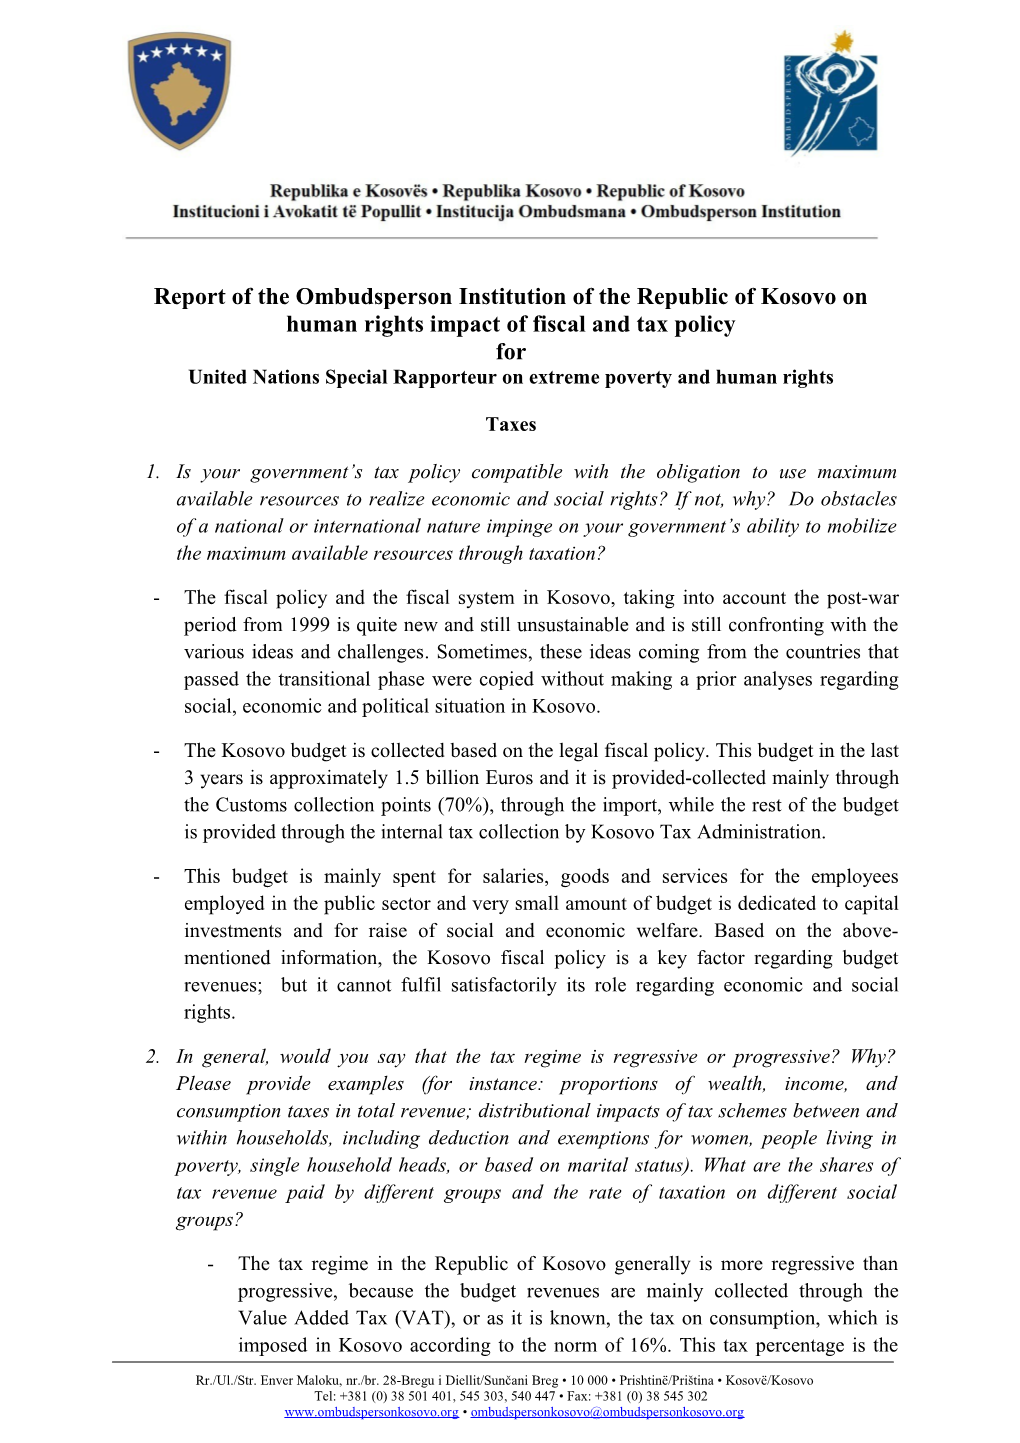 United Nations Special Rapporteur on Extreme Poverty and Human Rights